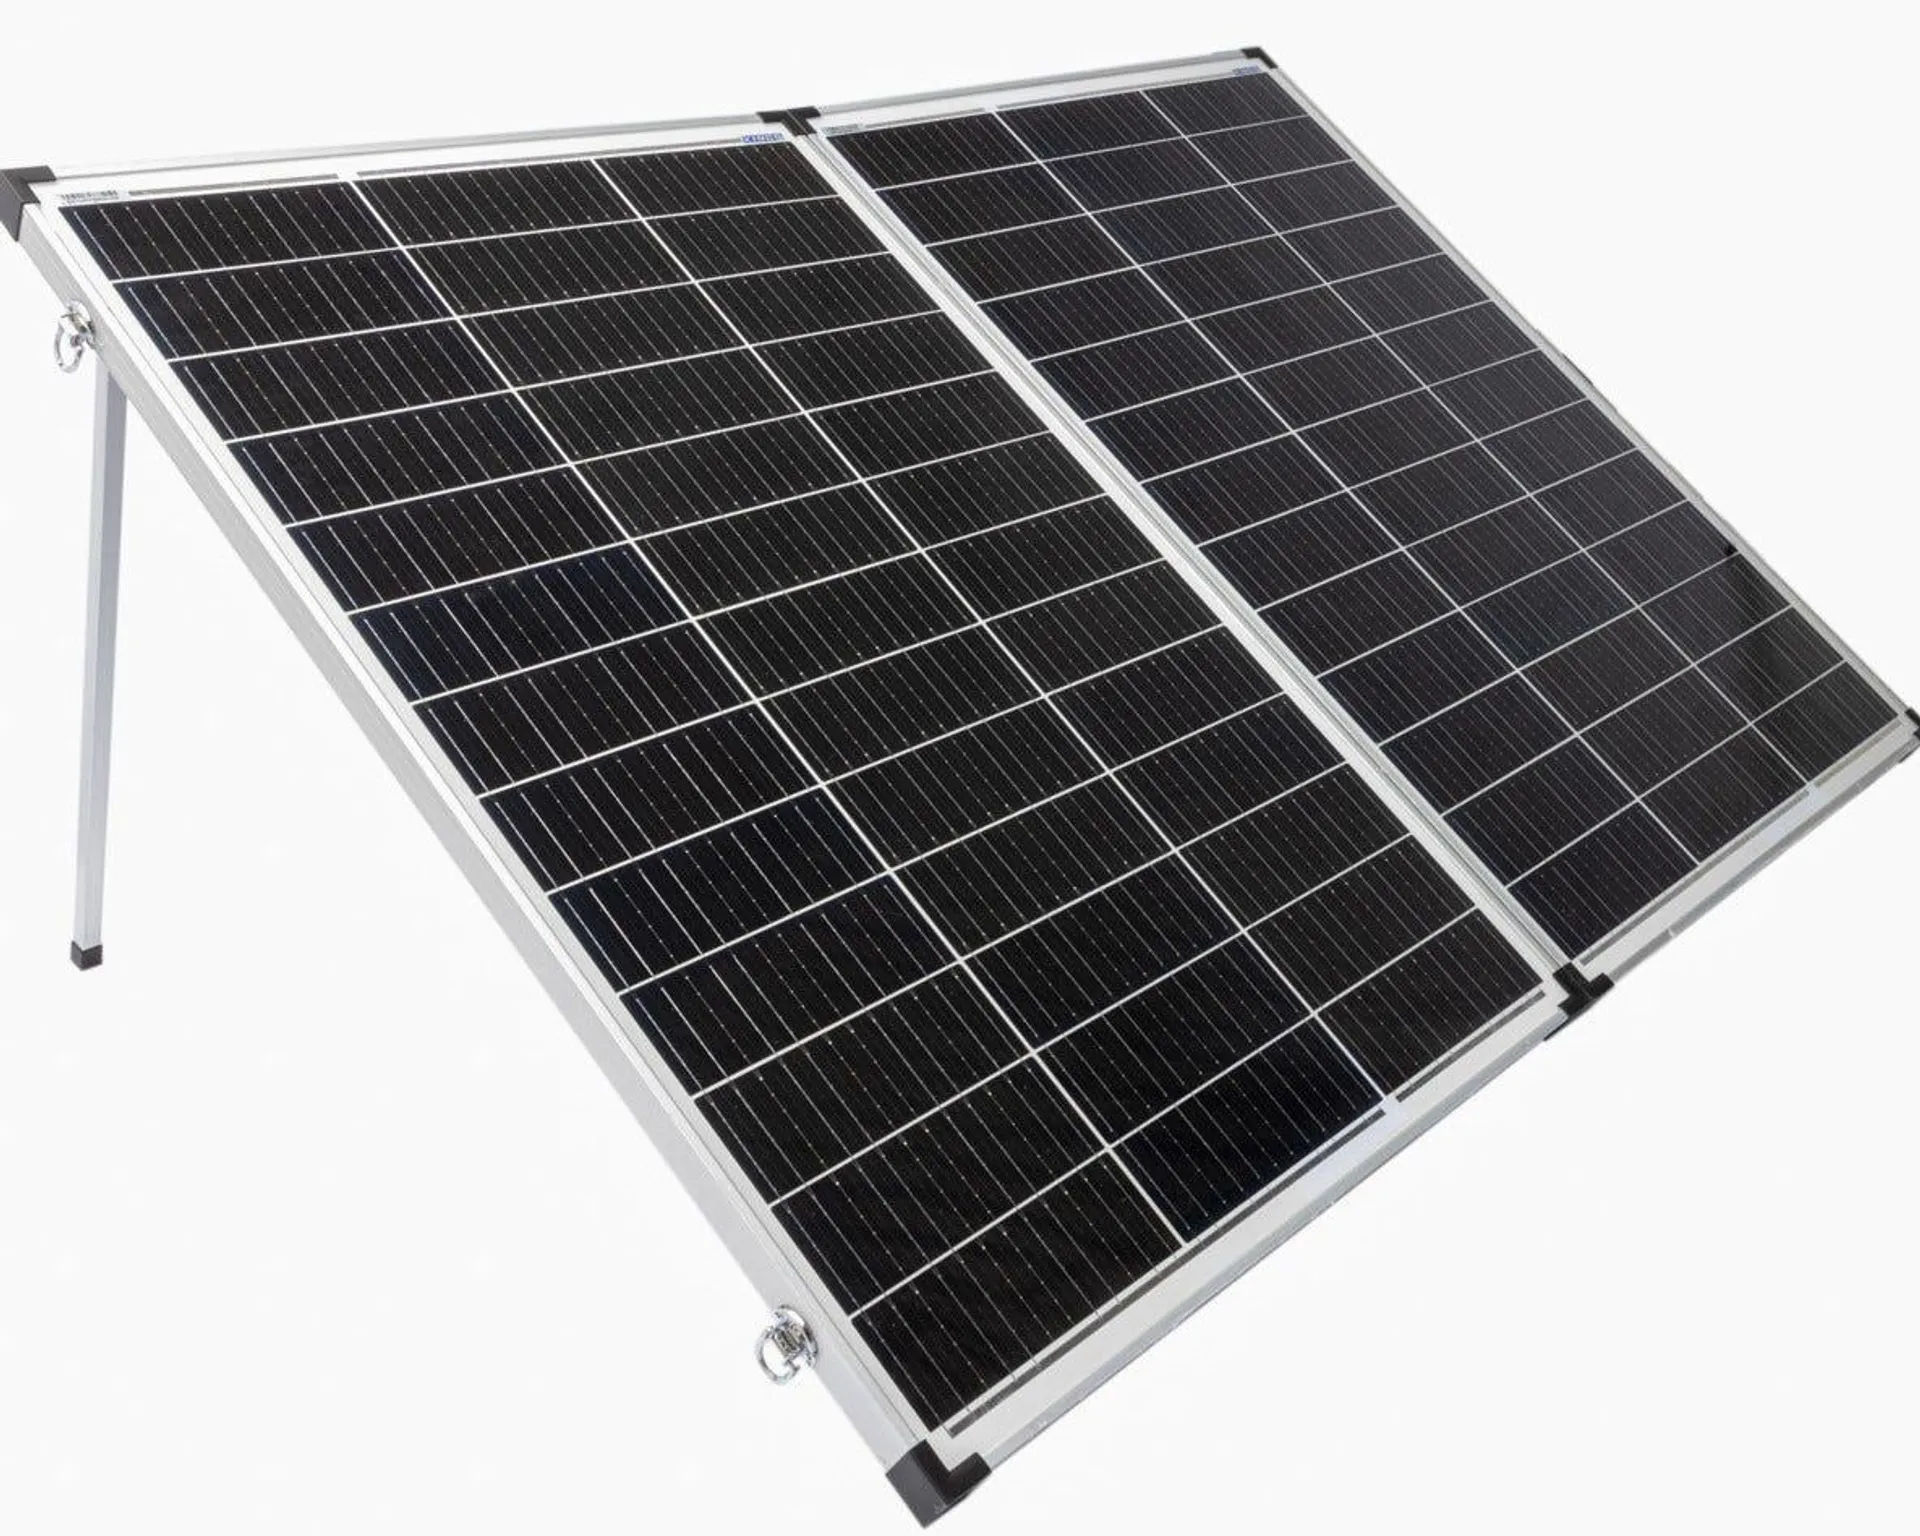 Kings 160w Solar Panel | Up to 8.89A Output | Grade-A Monocrystalline Solar Cells | Quick-Connect Plug | Panel Only